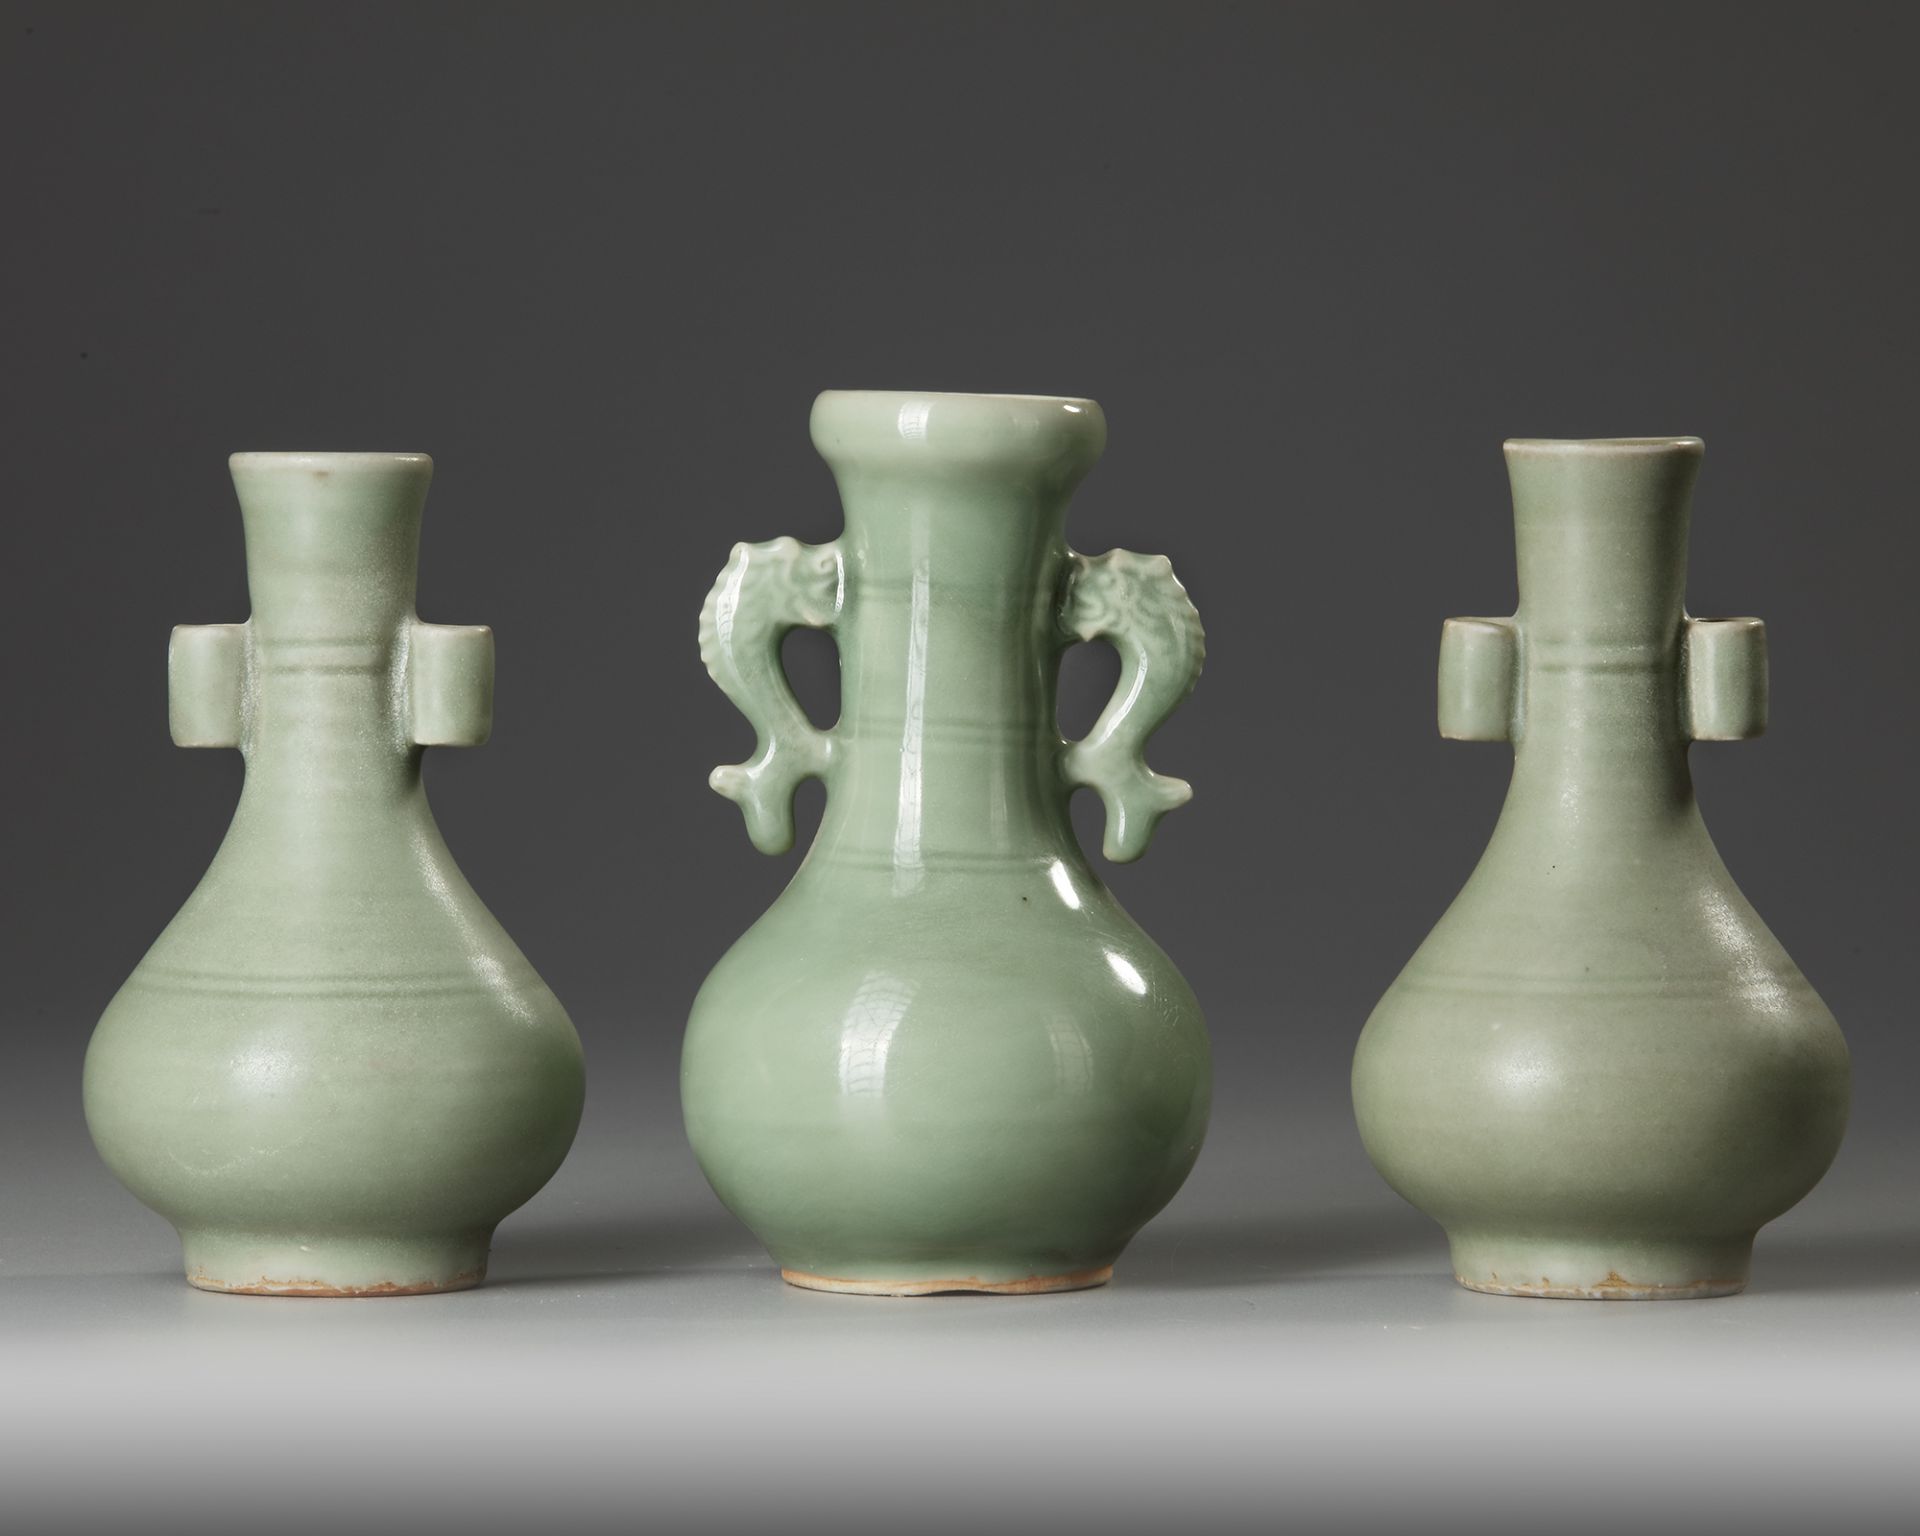 THREE CHINESE LONGQUAN CELADON VASES, SONG DYNASTY (960-1127 ) /YUAN DYNASTY (1271-1368) - Image 7 of 7